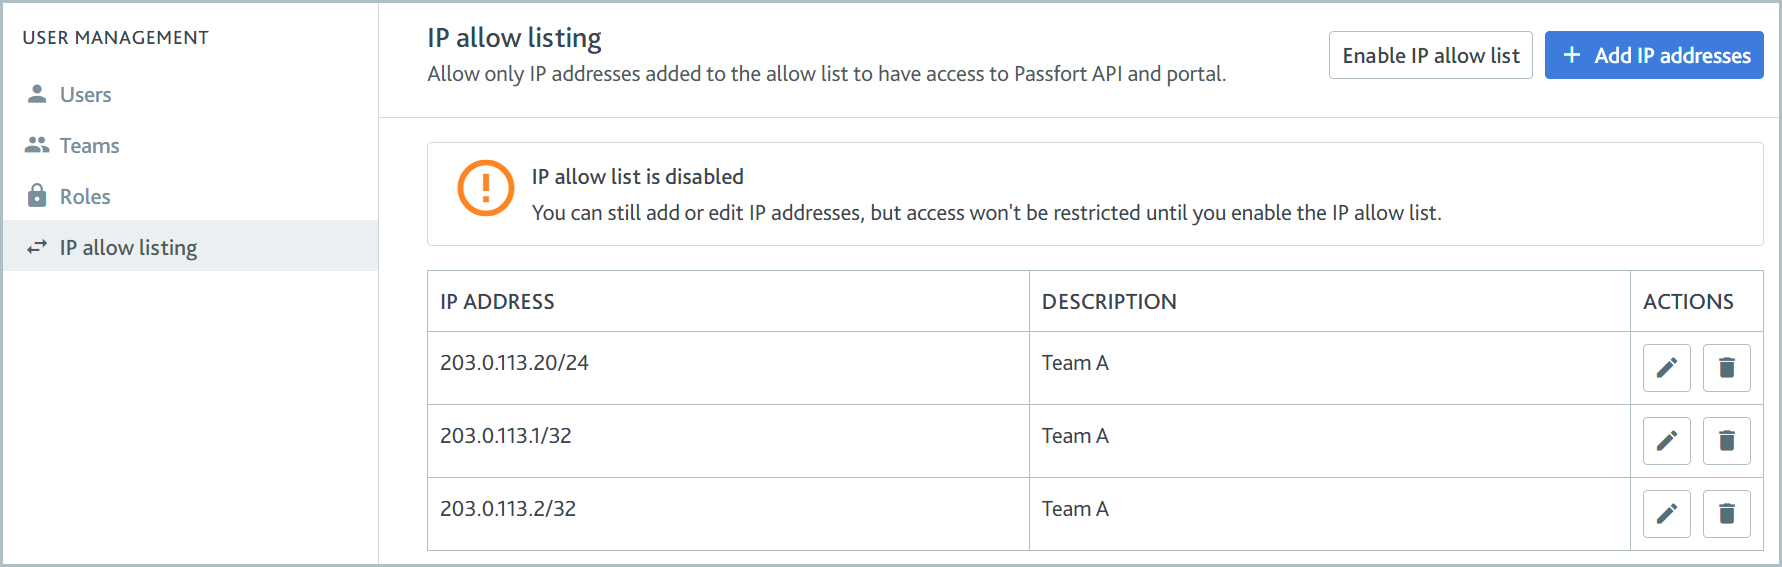 IP allow listing page showing notification that the list is disabled.